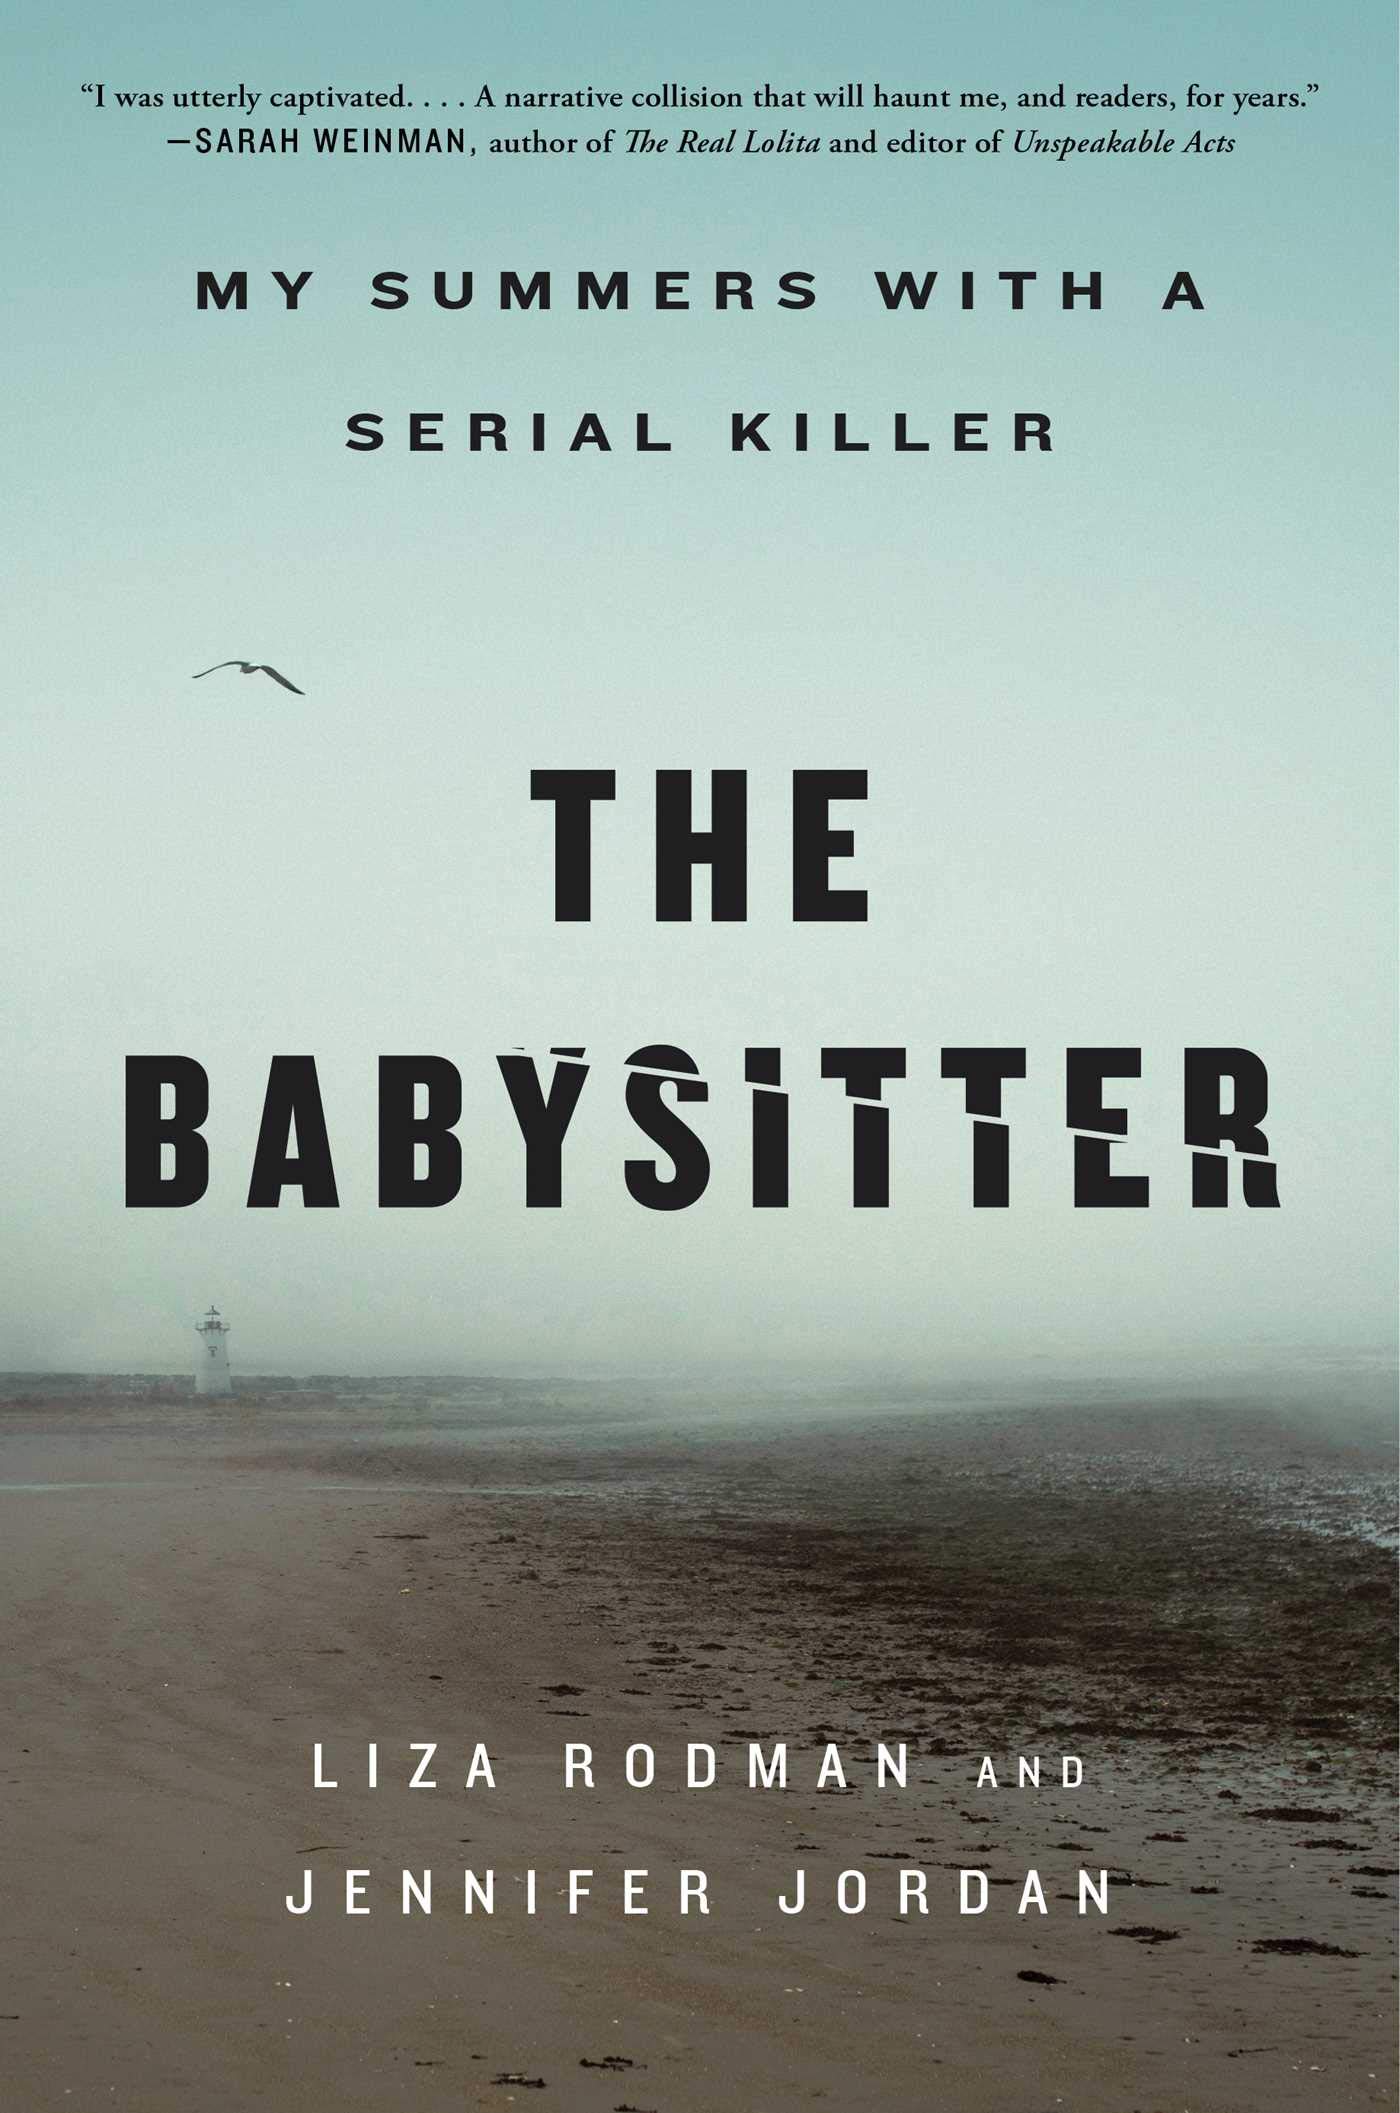 The Babysitter: My Summers With A Serial Killer by Liza Rodman and Jennifer Jordan